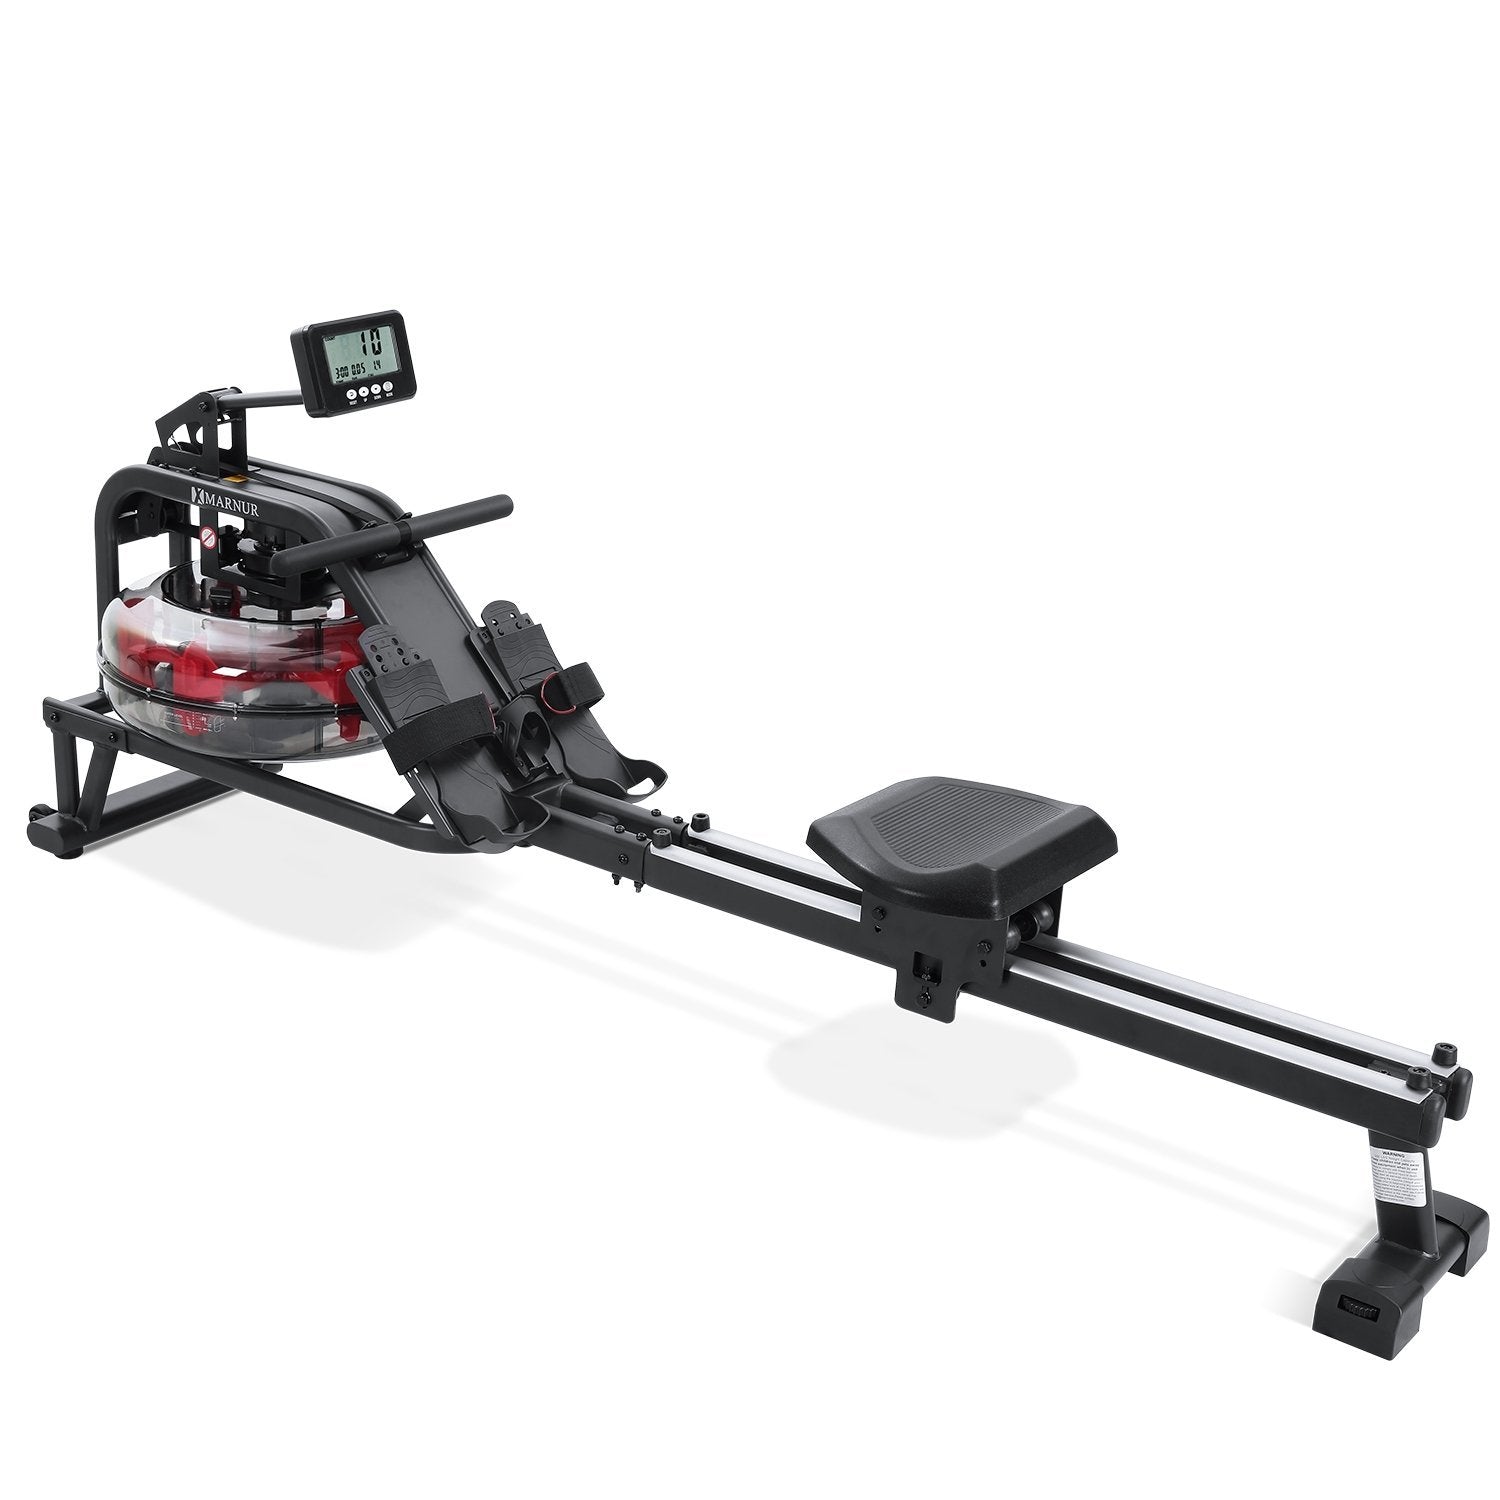 Load image into Gallery viewer, Marnur Water Rowing Machine for Home Use, Portable Double Track Water Resistance - NAIPO
